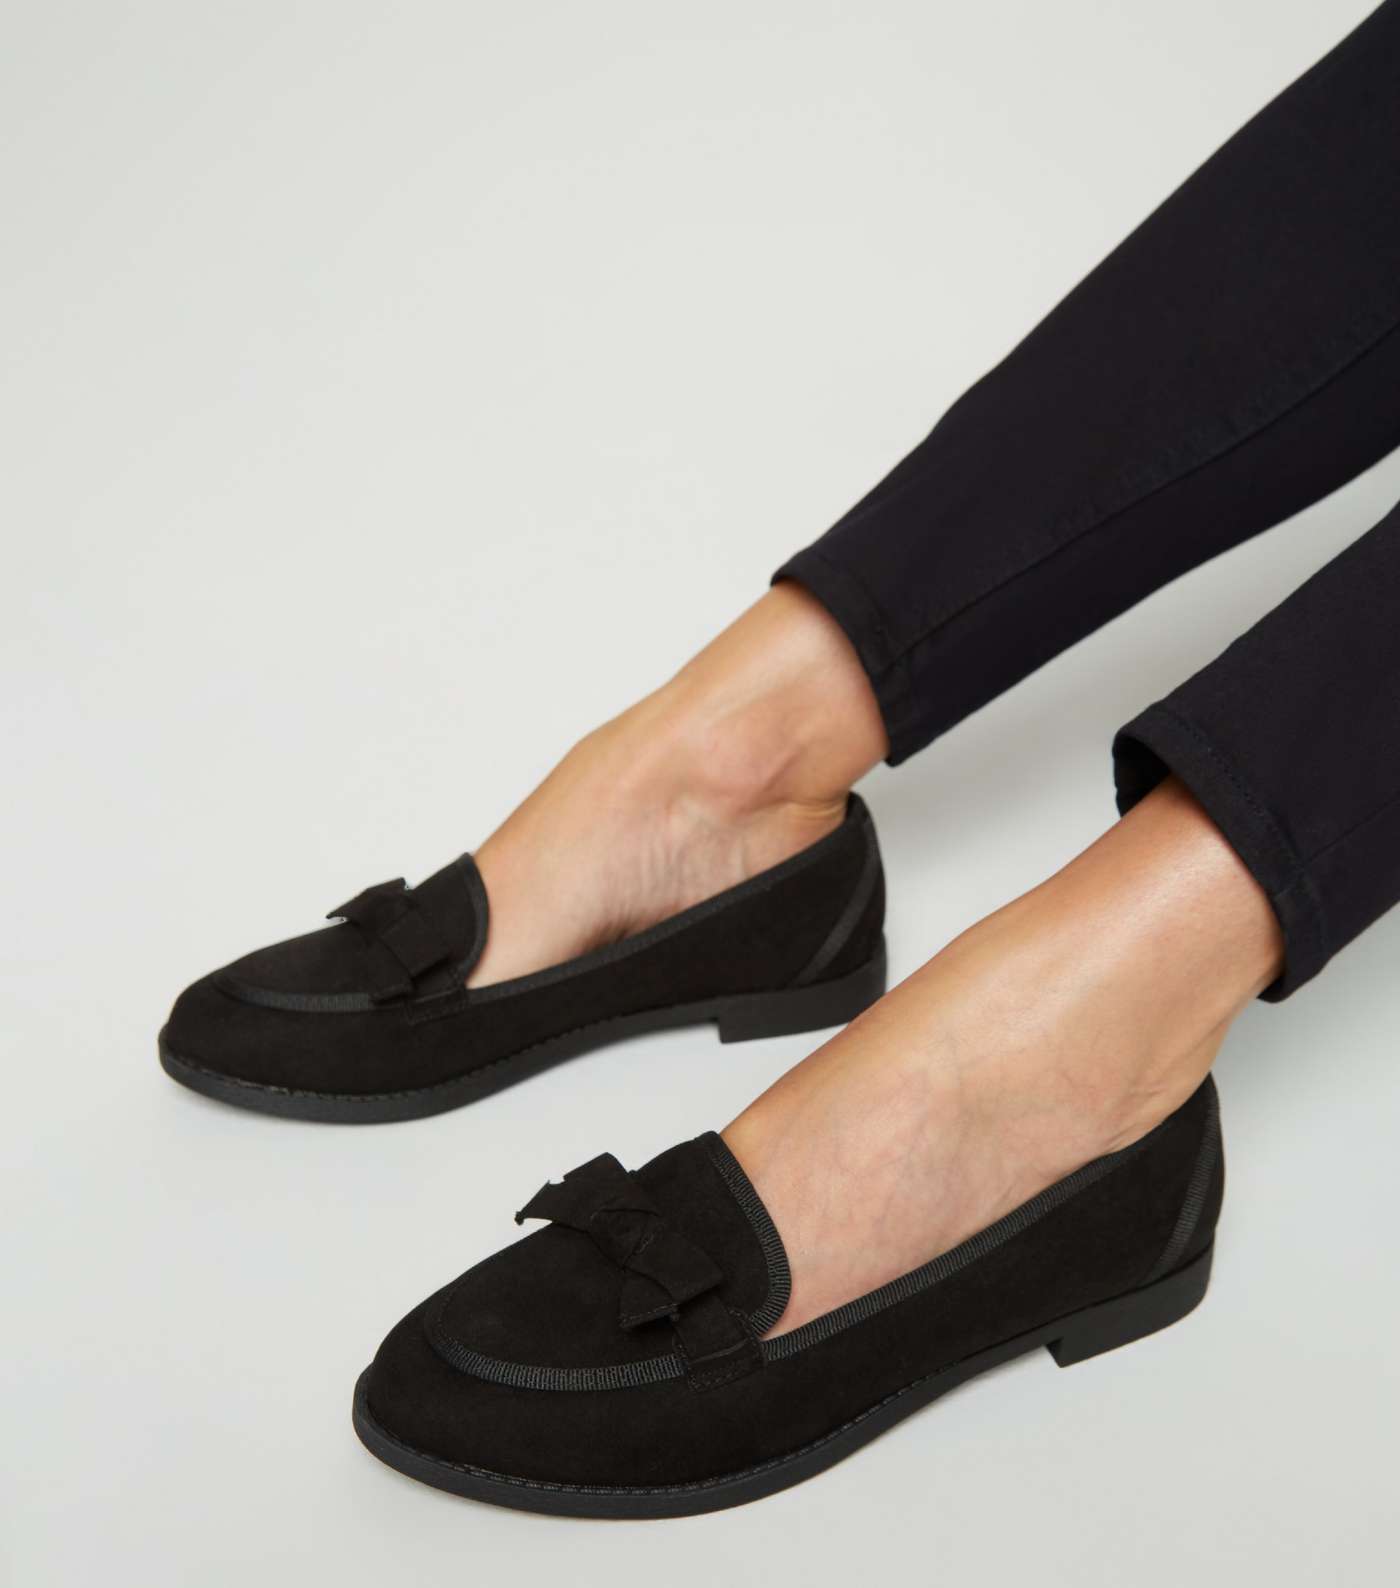 Wide Fit Black Suedette Bow Front Loafers Image 2